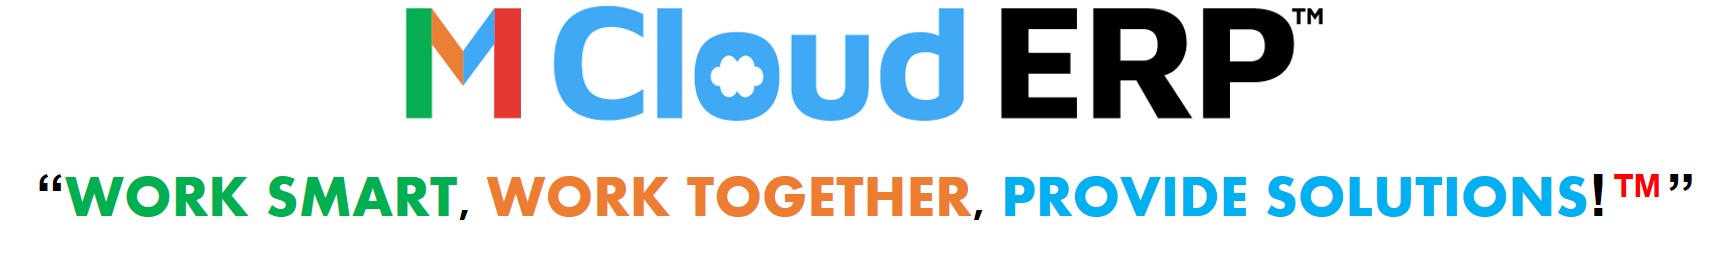 M Cloud ERP. Work smart, work together, provide solutions!